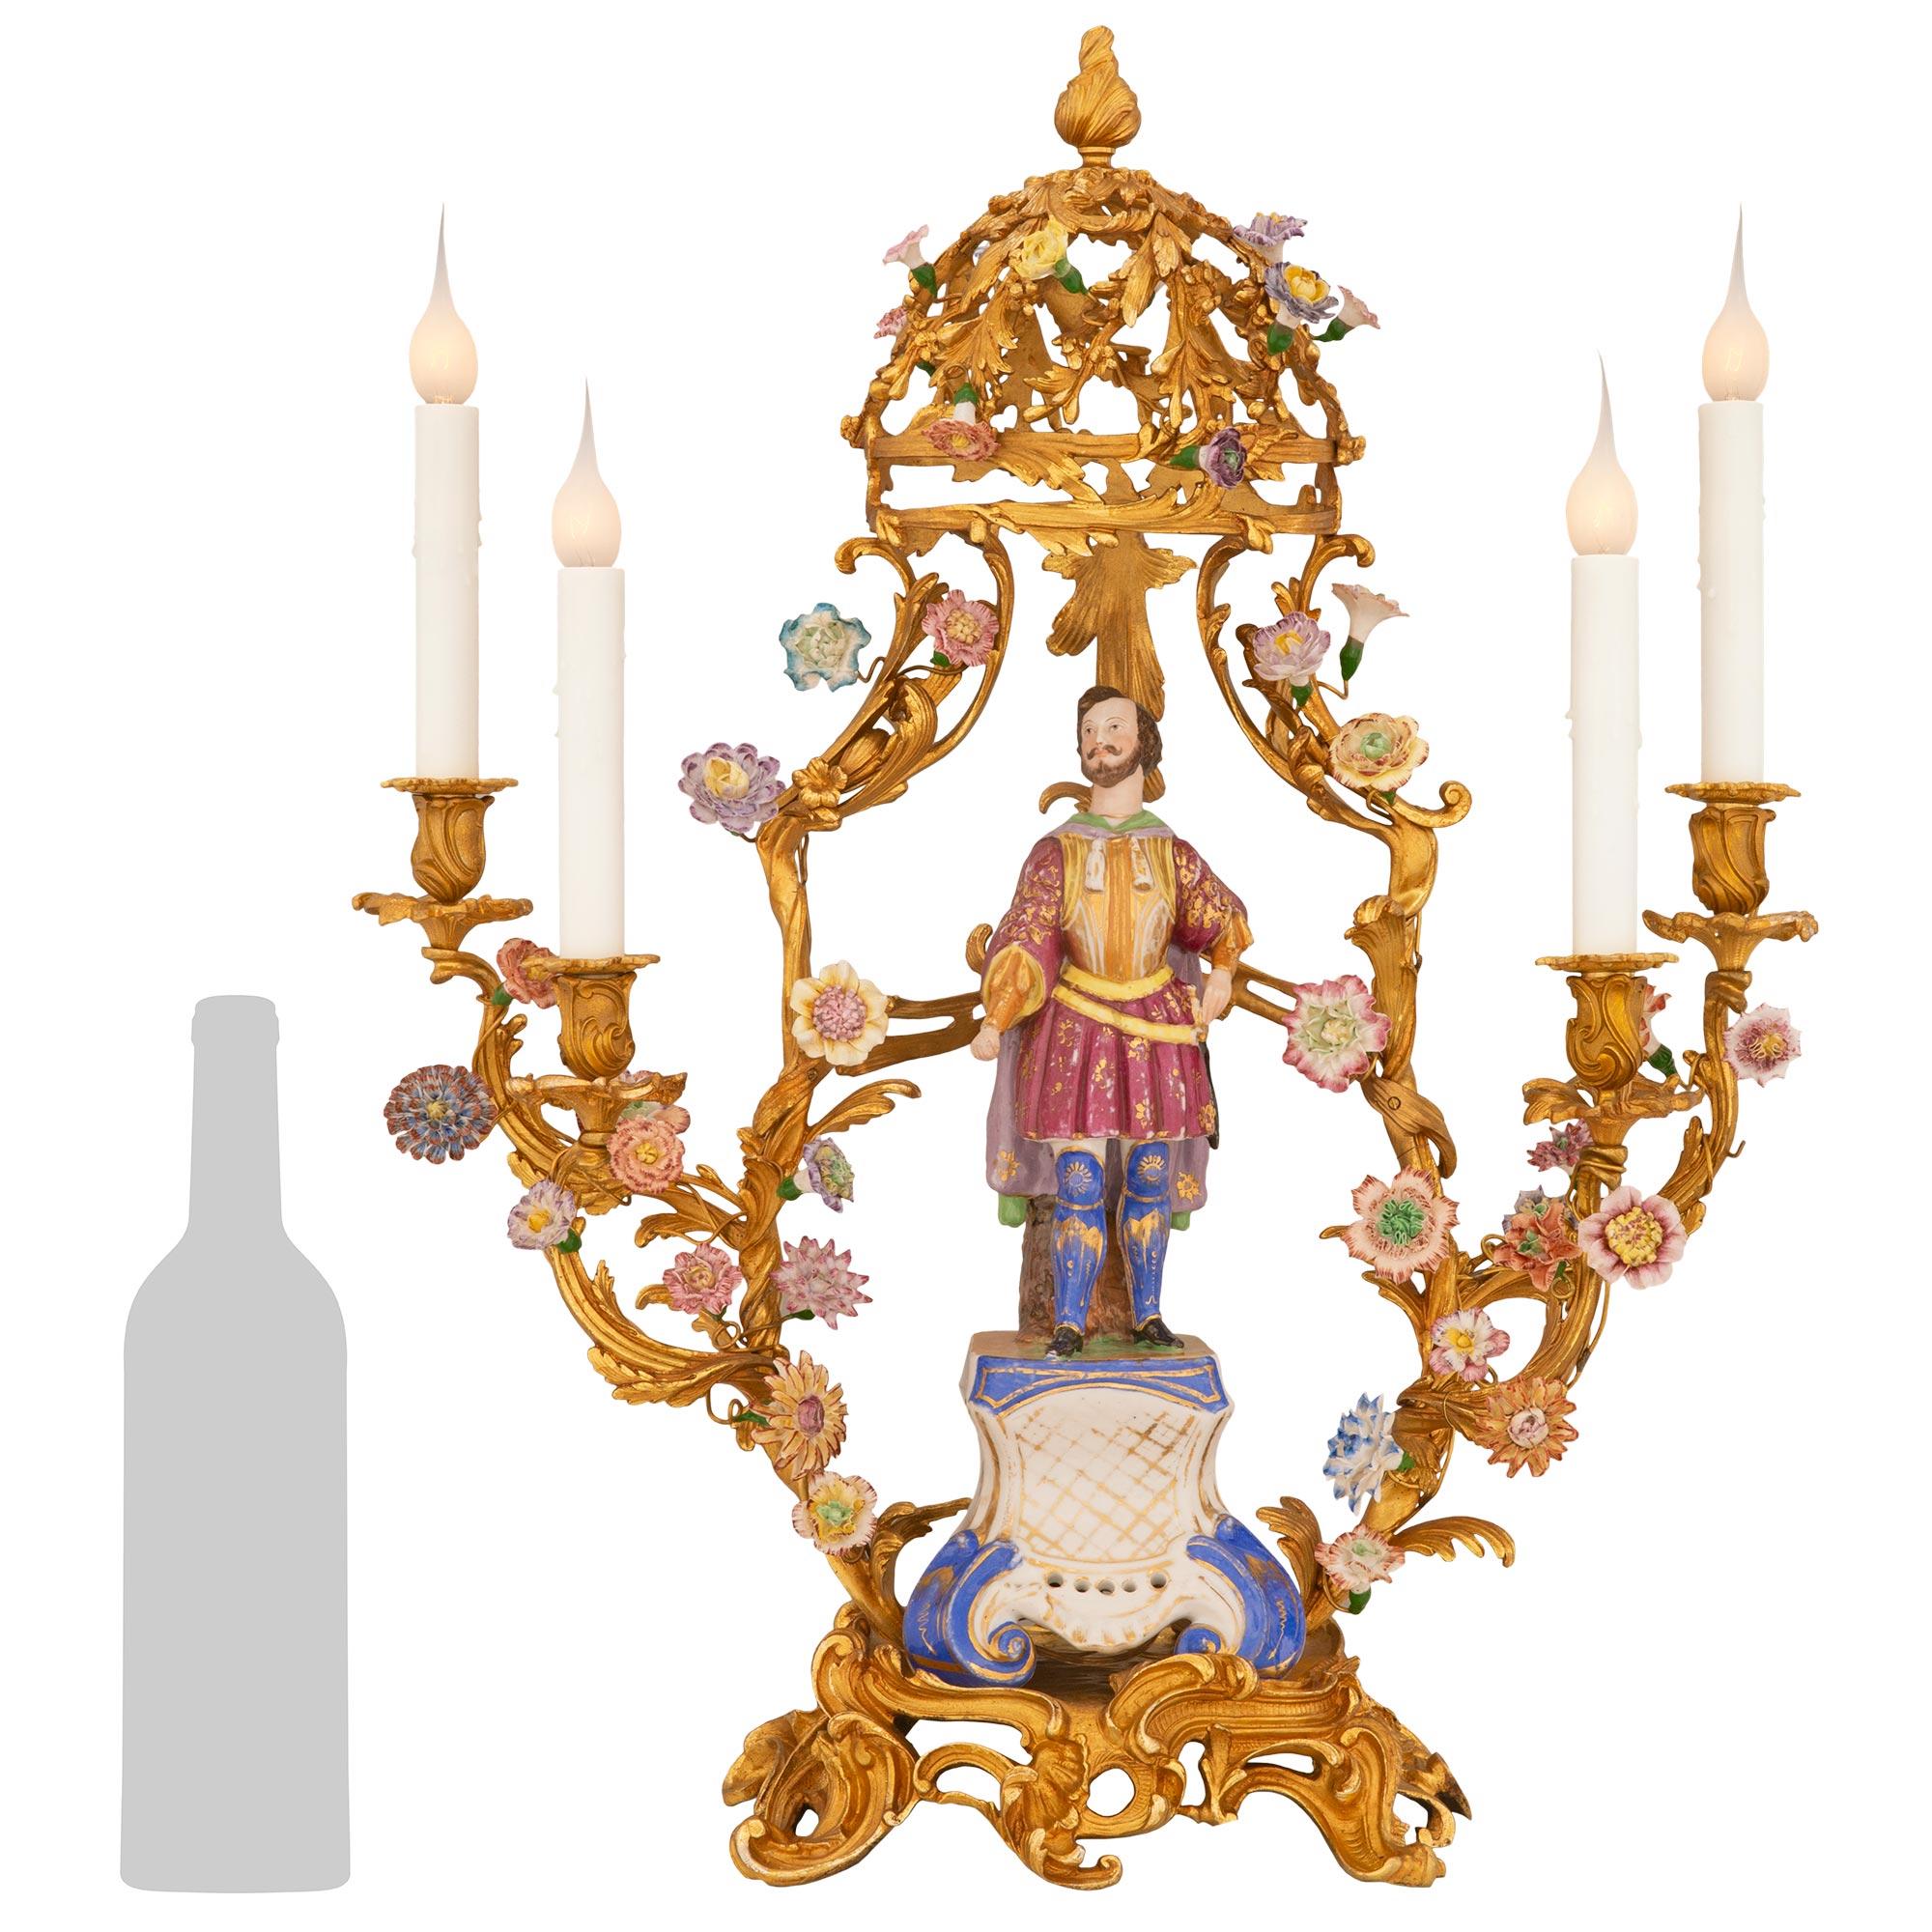 A striking and extremely decorative true pair of French turn of the century Louis XV st. ormolu and Saxe porcelain candelabra lamps. Each four arm lamp is raised by a beautiful pierced ormolu base with wonderful scrolled foliate designs and lovely